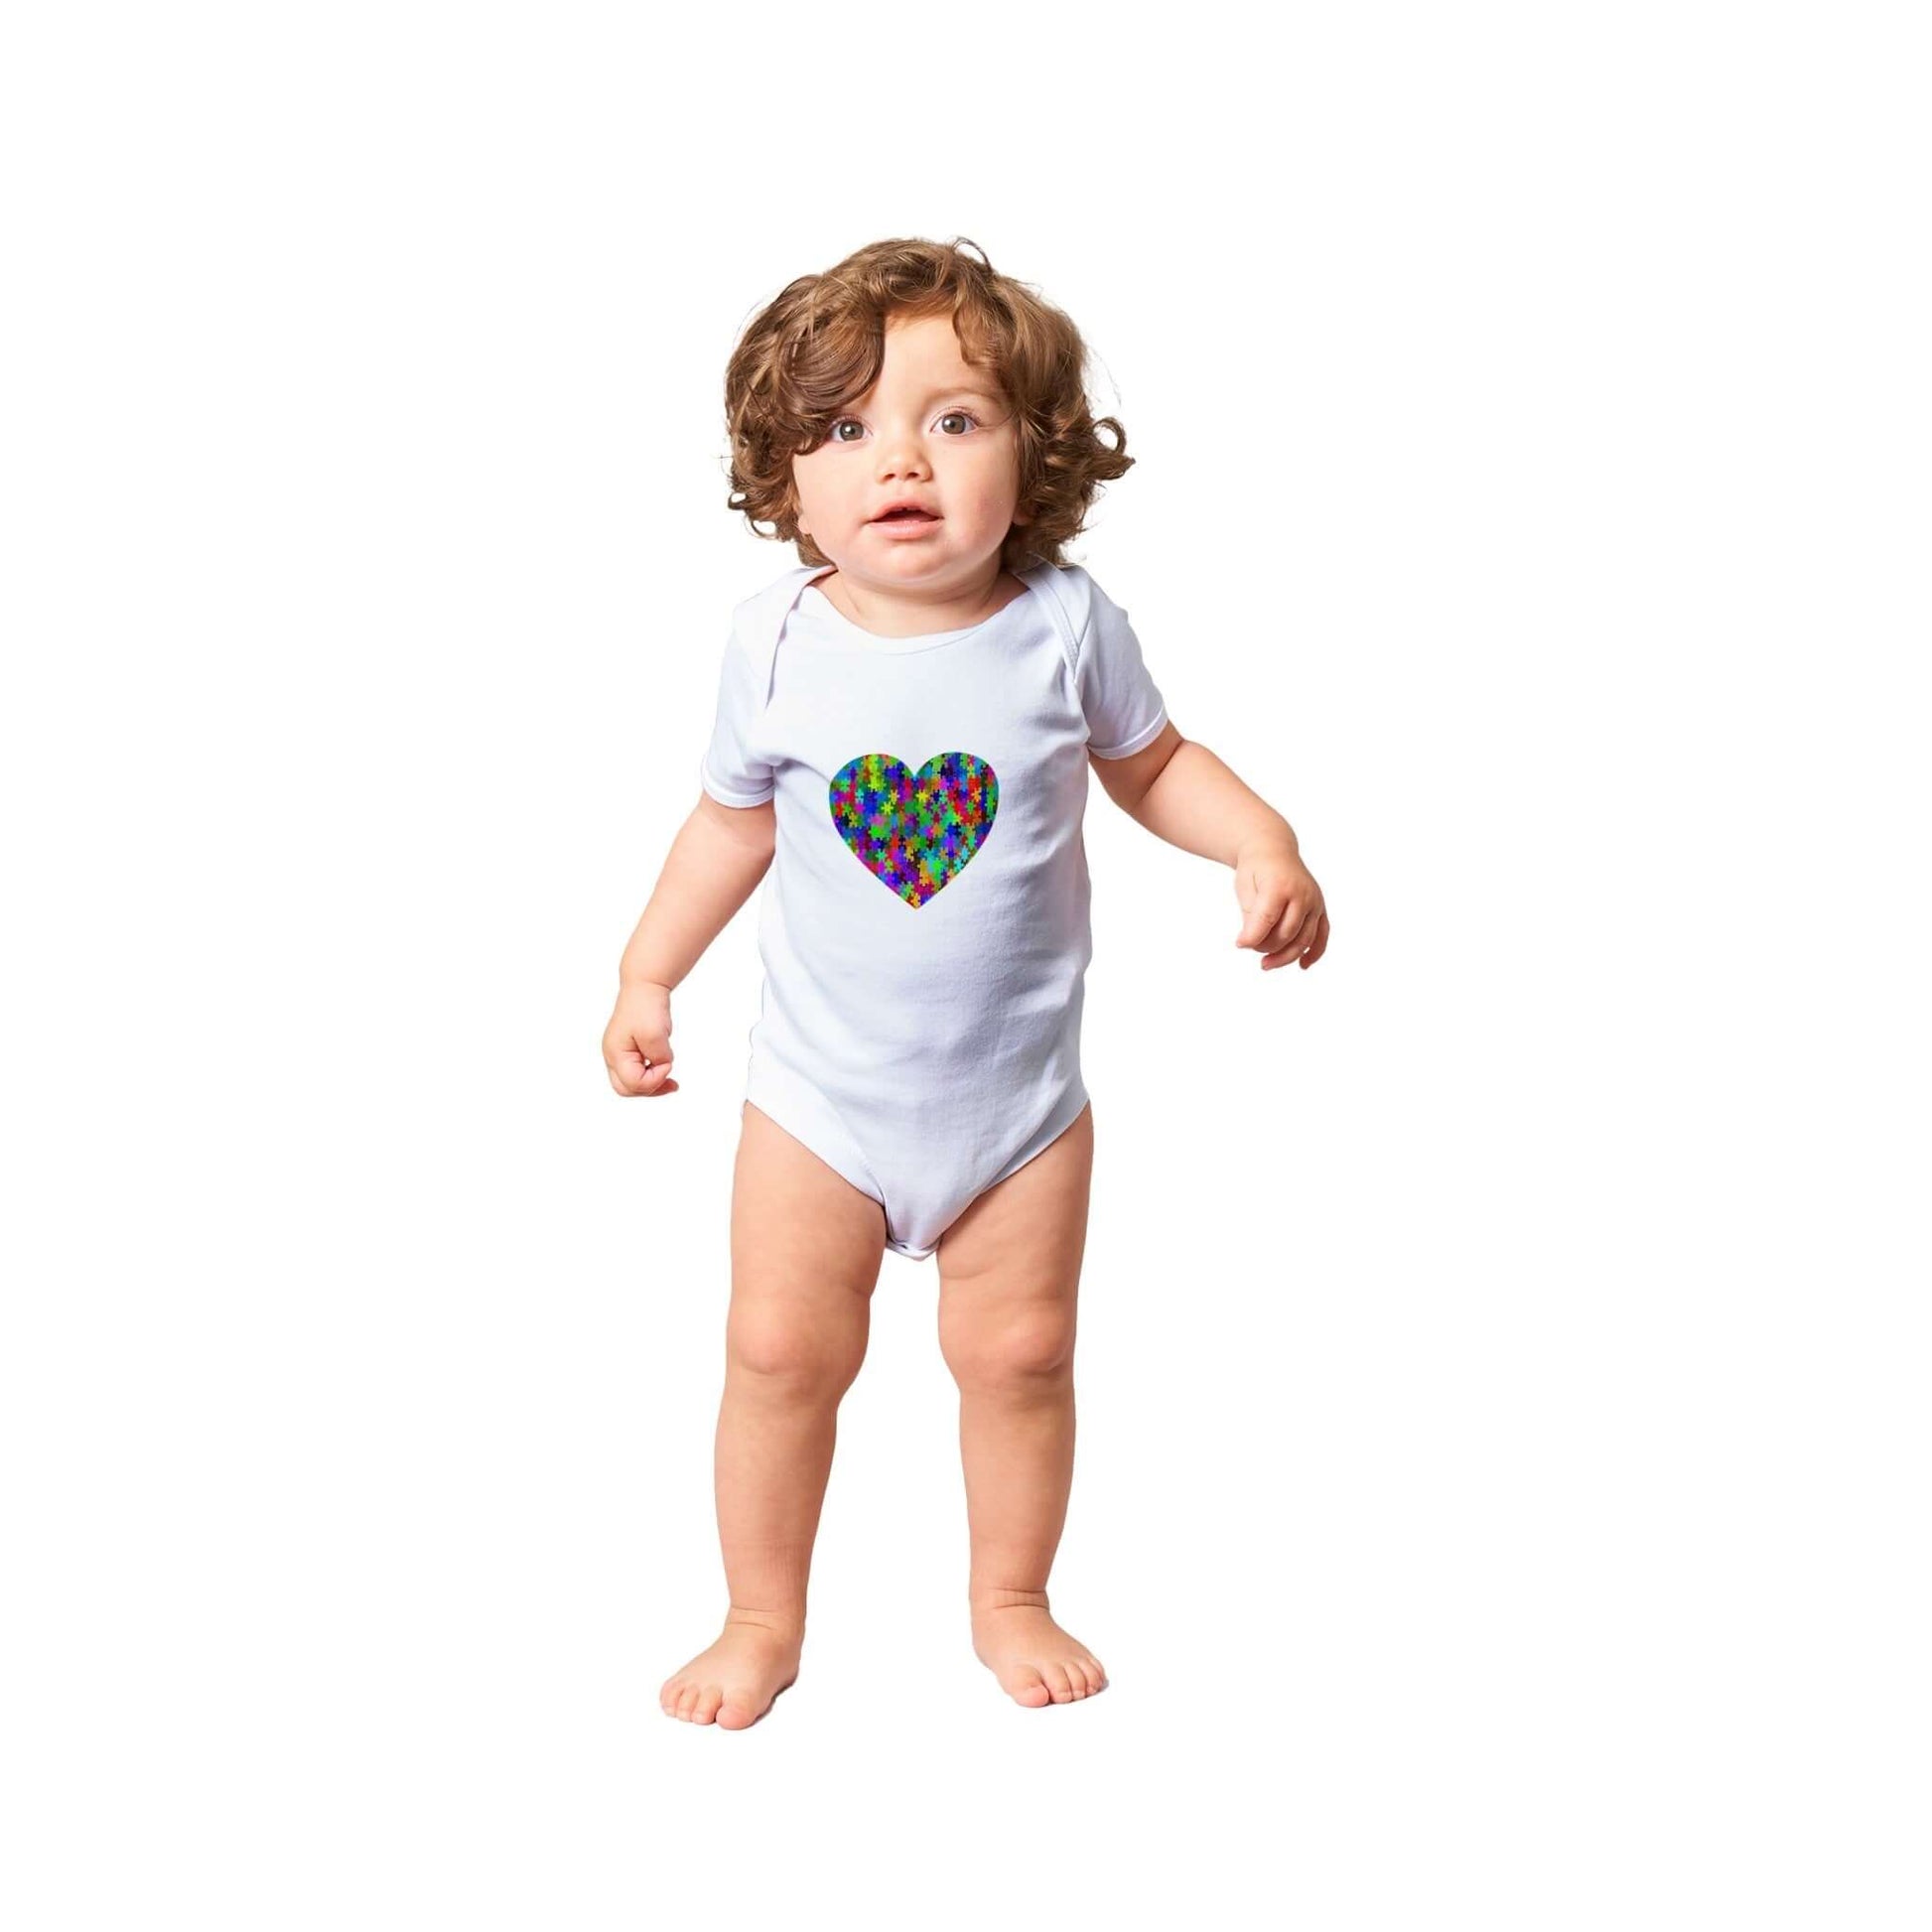 Baby Bodysuit for Big Hearts! - Just Baskets